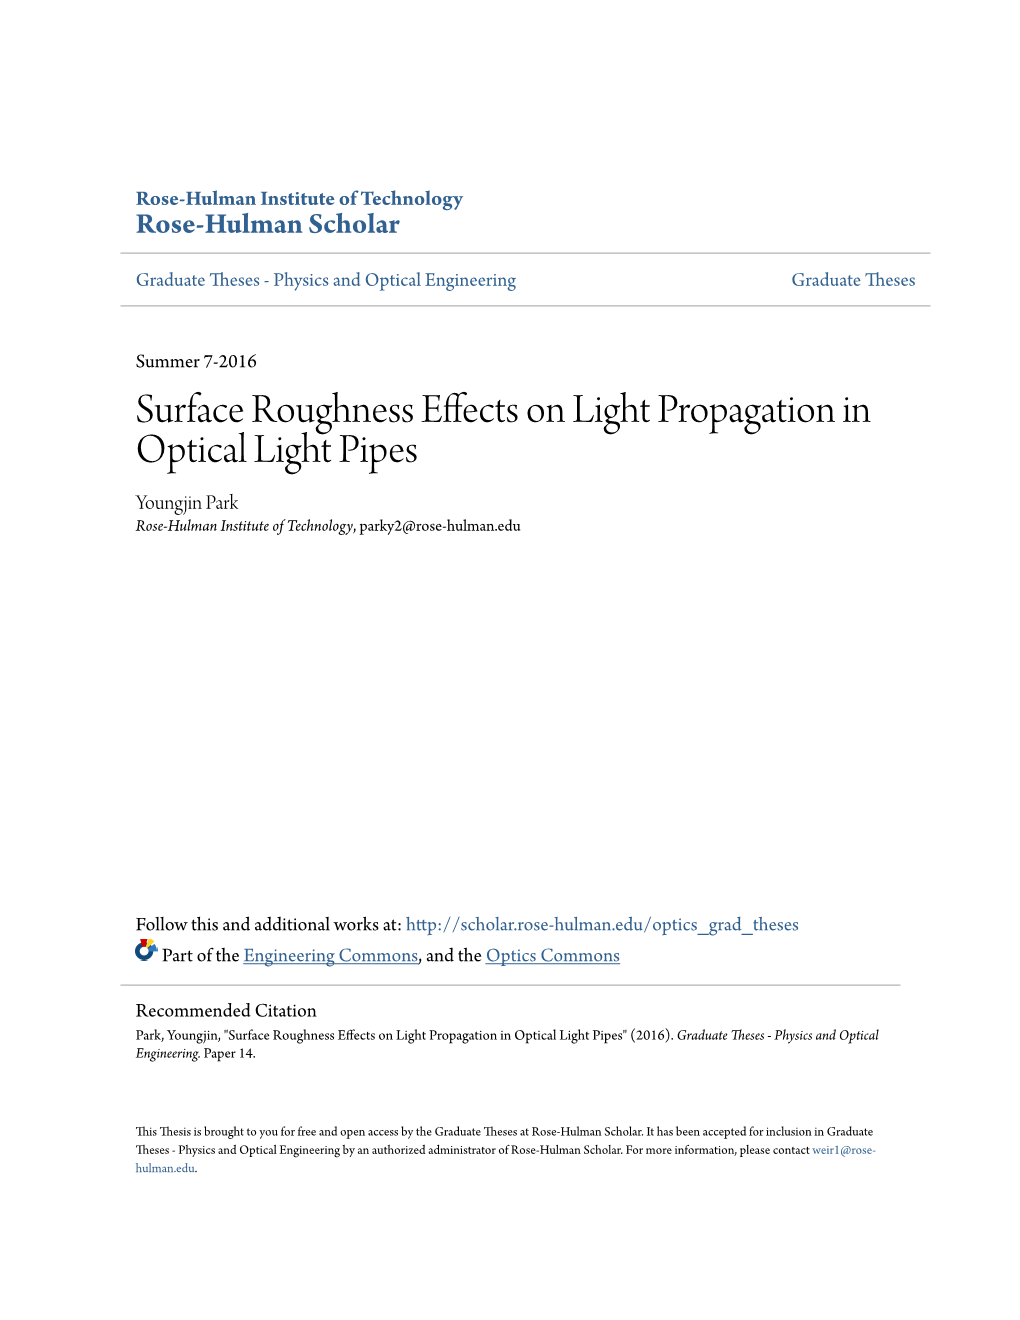 Surface Roughness Effects on Light Propagation in Optical Light Pipes Youngjin Park Rose-Hulman Institute of Technology, Parky2@Rose-Hulman.Edu